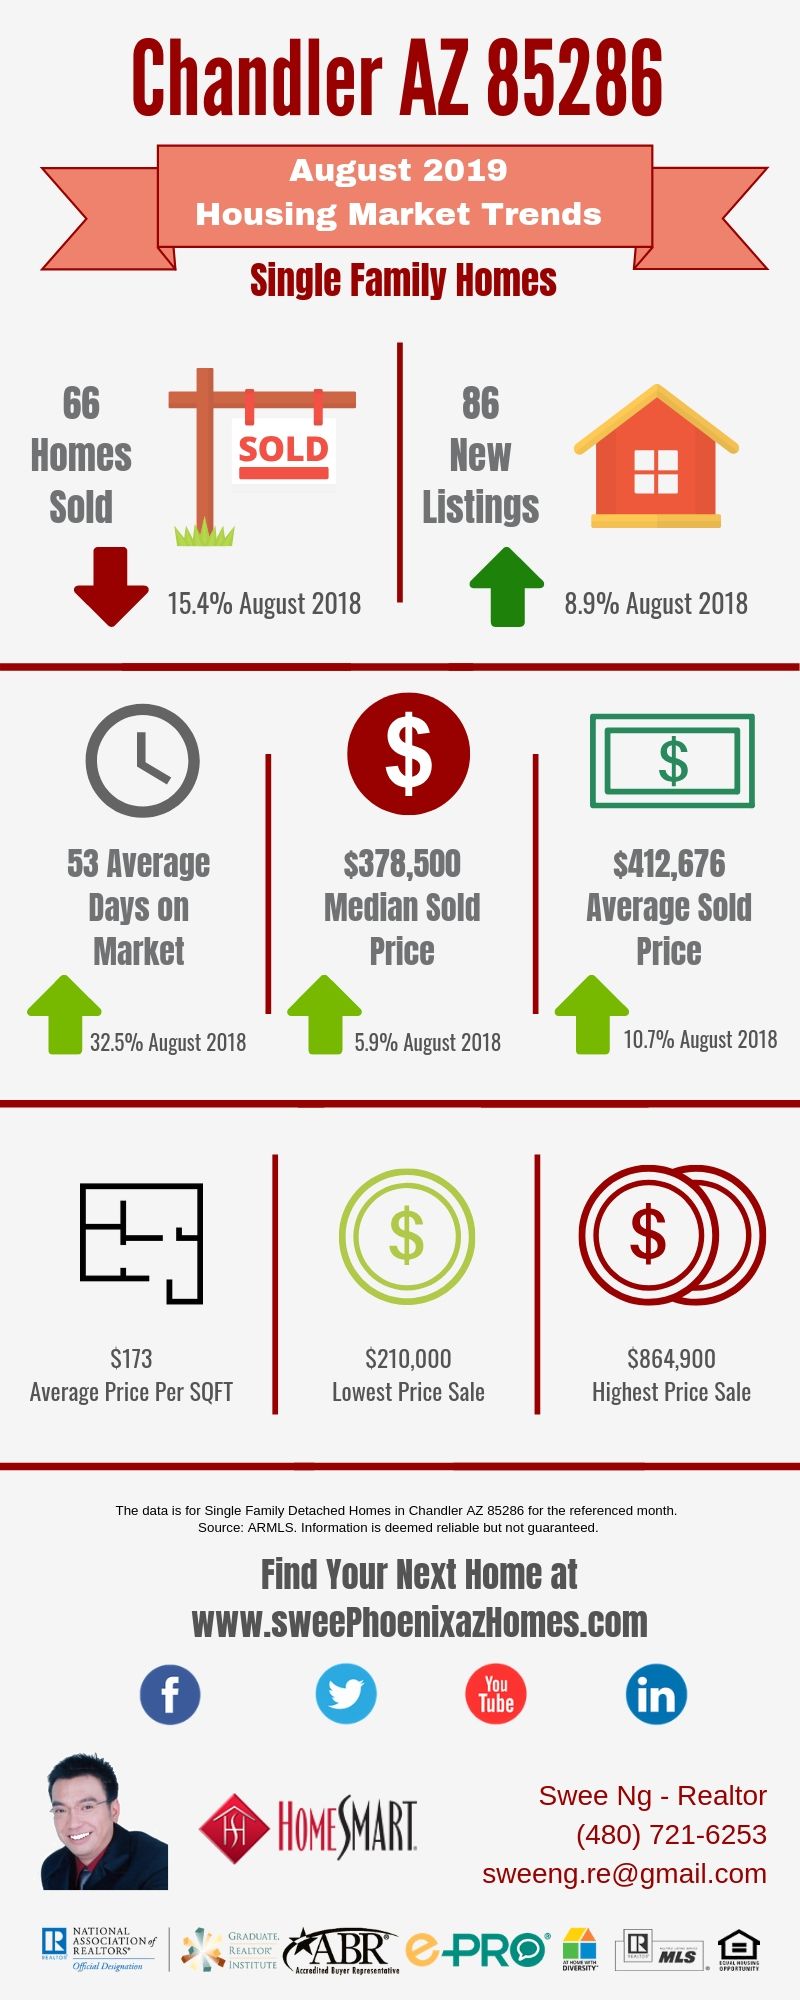 Chandler AZ 85286 Housing Market Trends Report August 2019, House Value, Real Estate and Statistic by Swee Ng